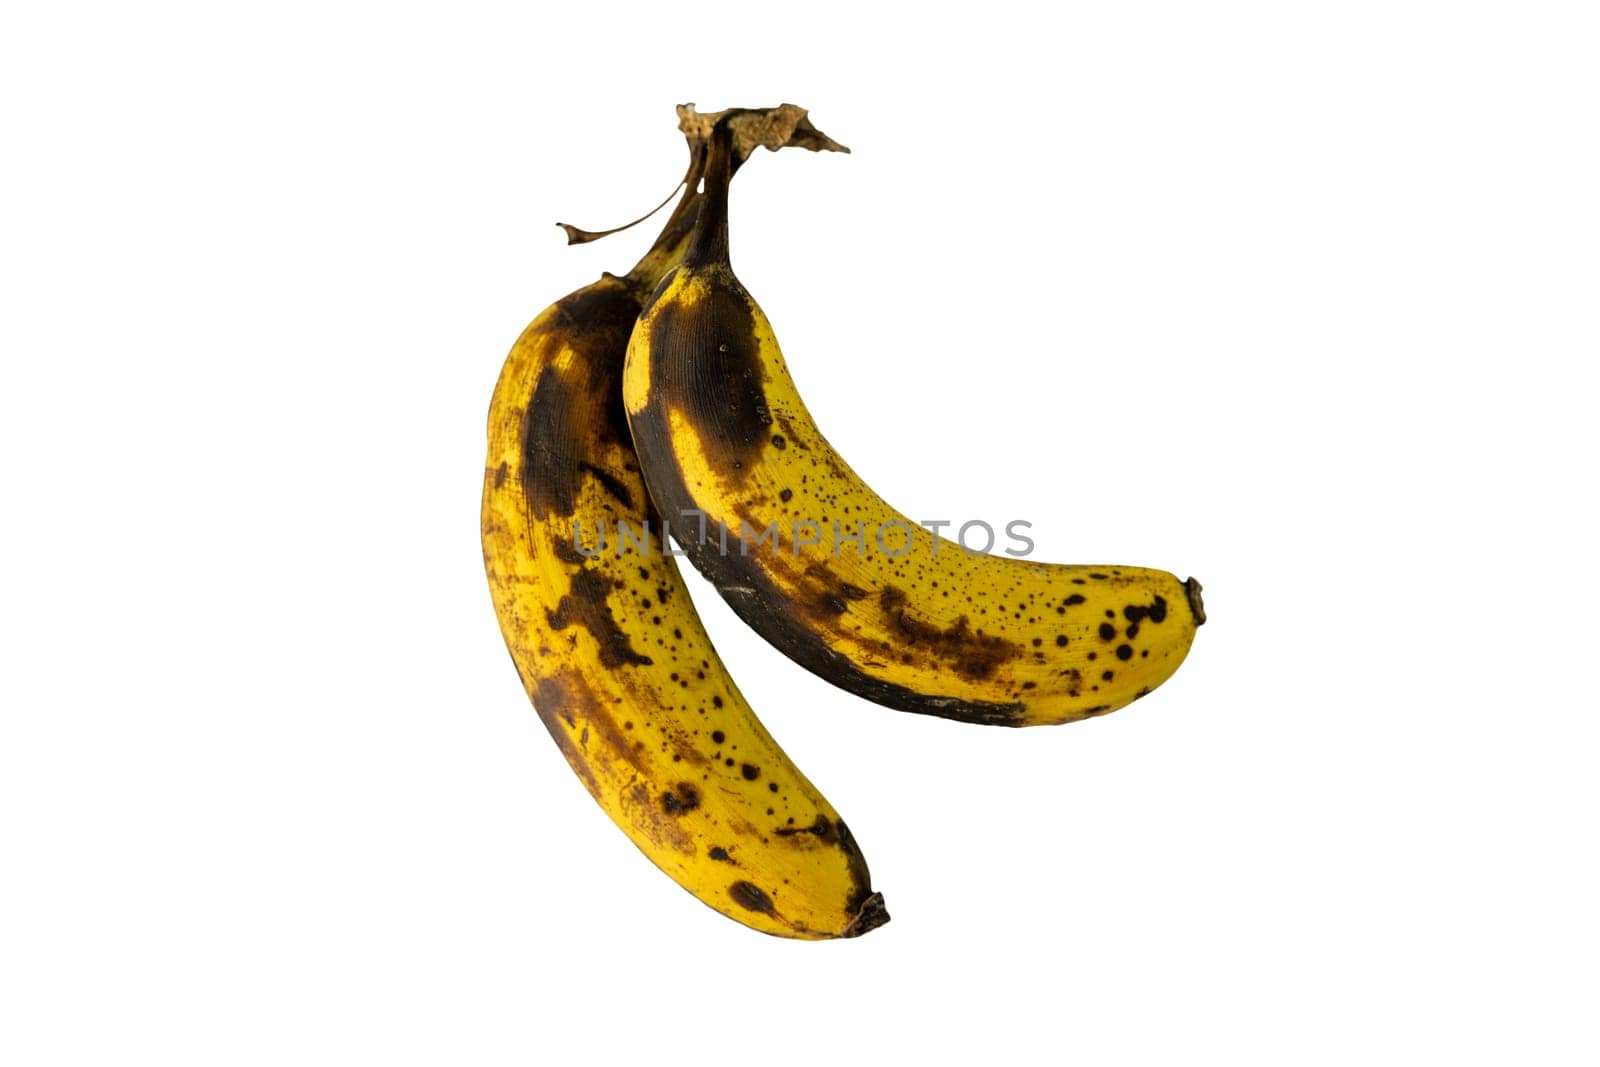 Old and overripe bananas on an isolated white background by Sonat